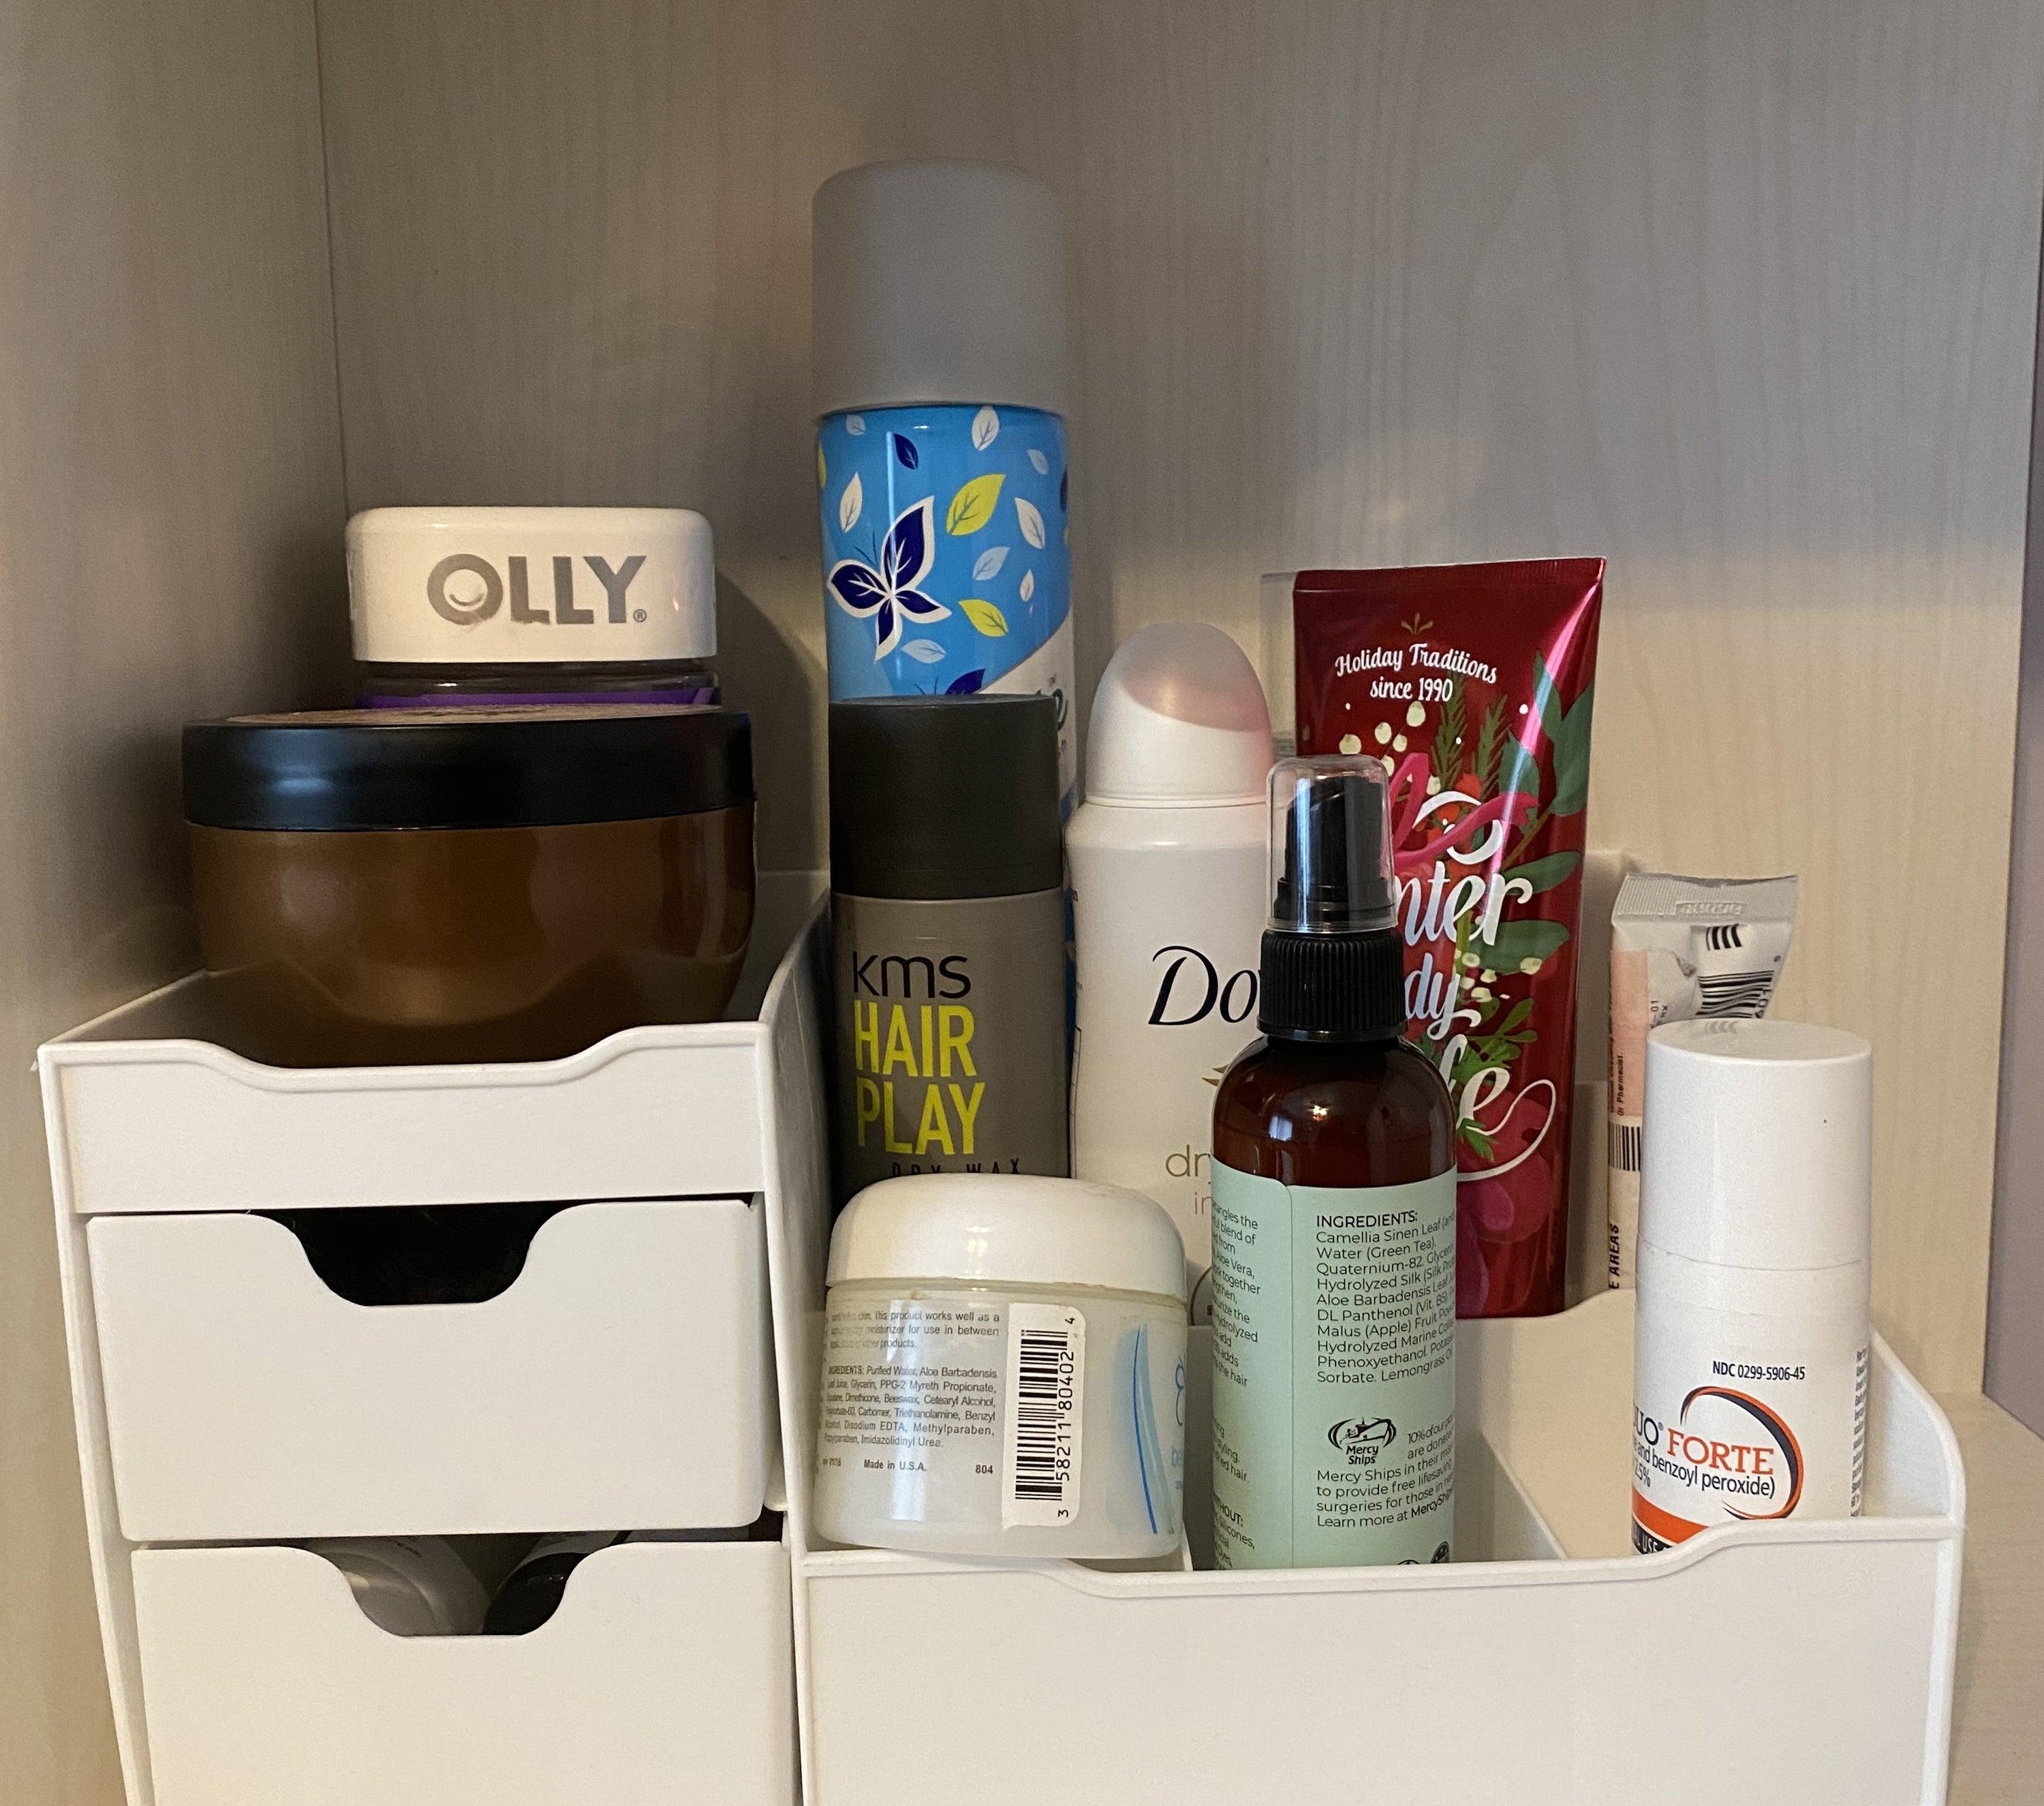 The vanity organizer with skincare and hair products on it